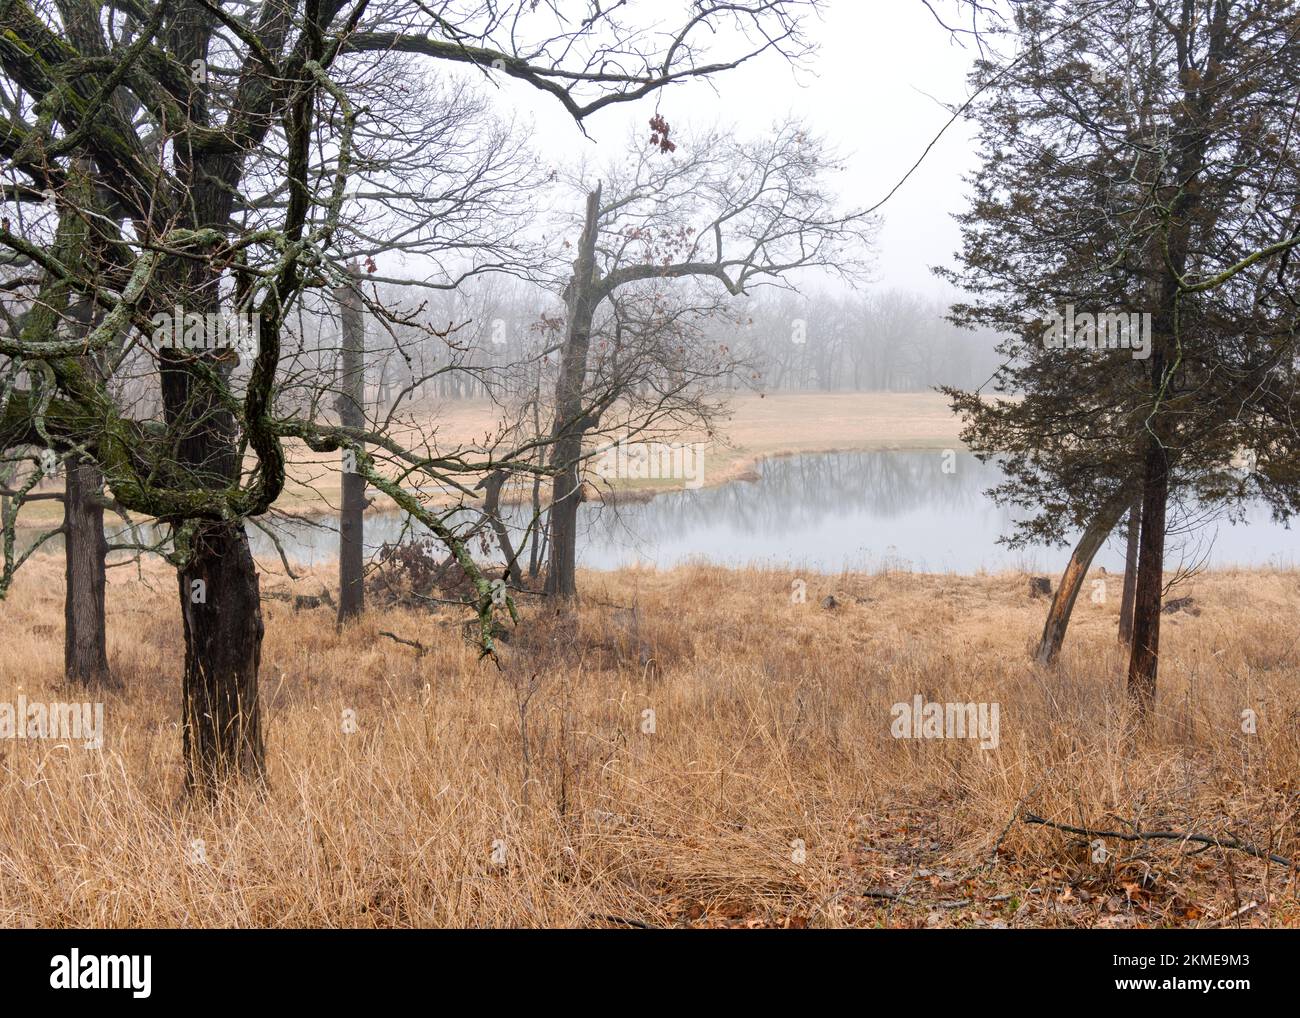 Looking out over a pond on an early foggy March morning. Stock Photo